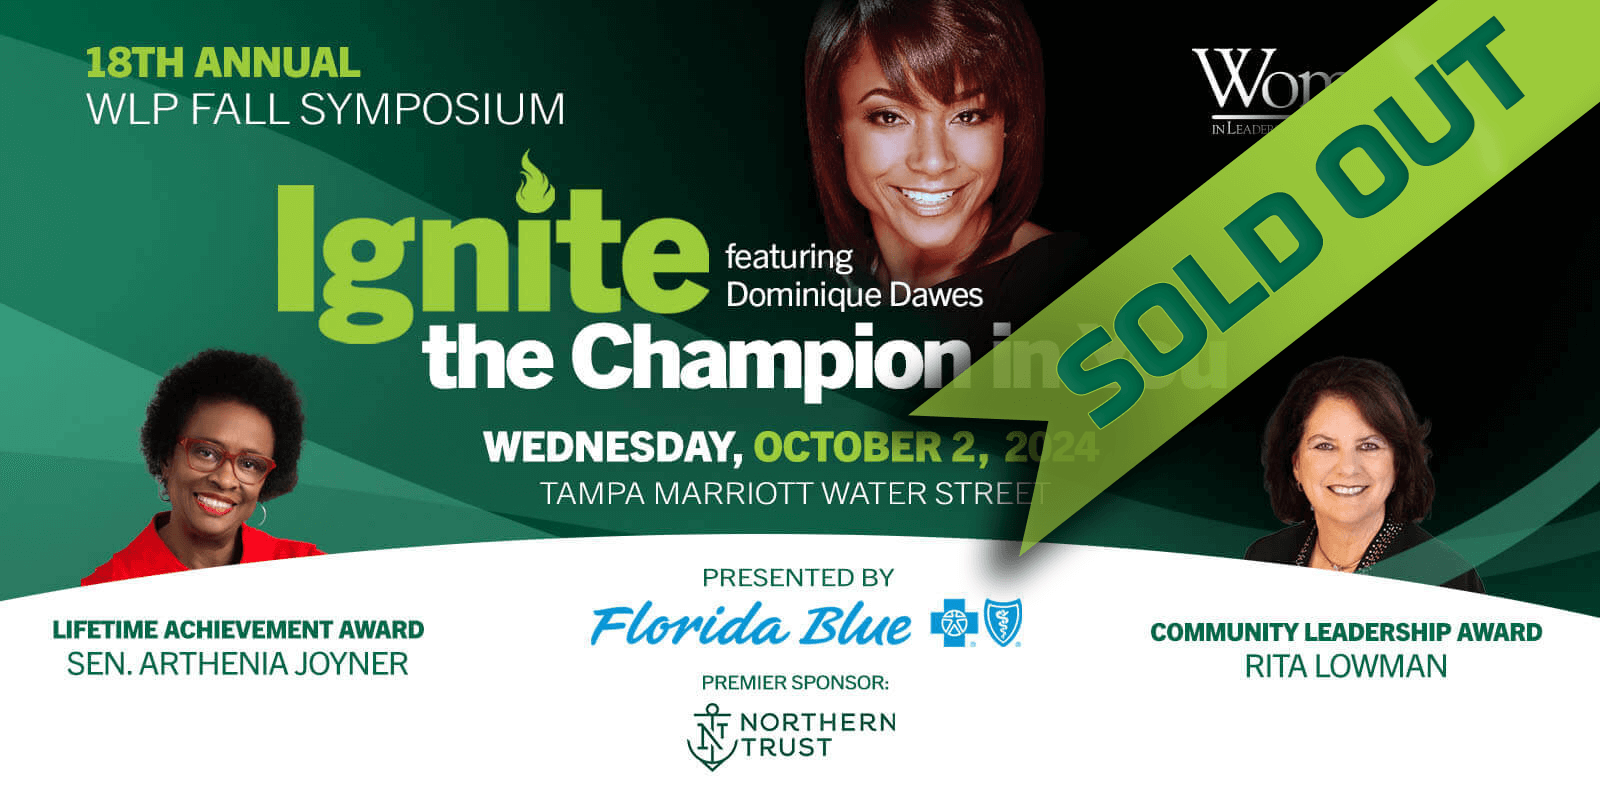 WLP Symposium - Ignite Featuring Dominique Dawes October 4, Tampa Marriott Water Street presented by Florida Blue